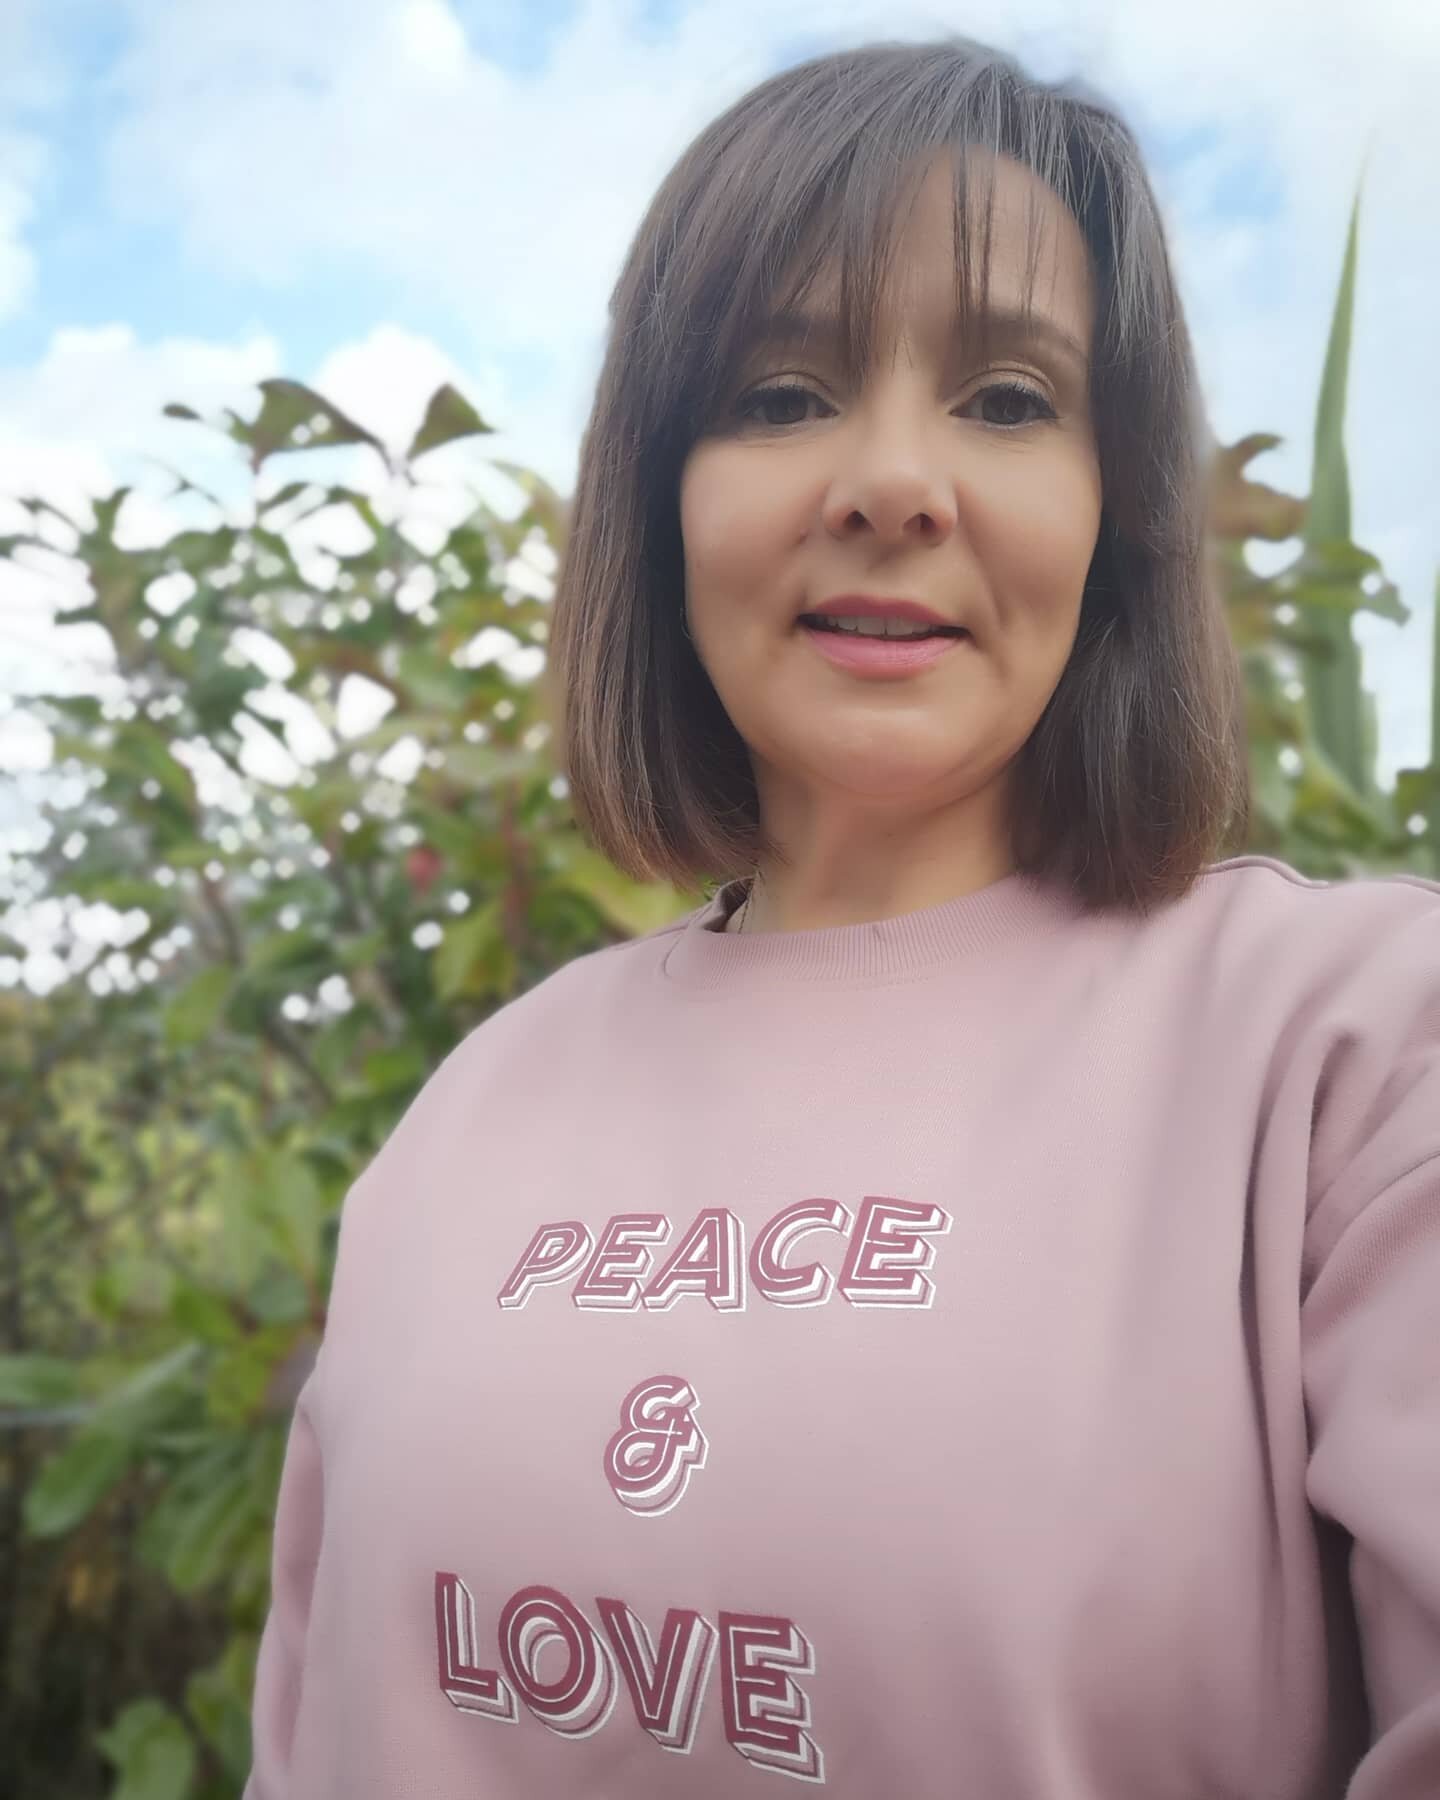 What we all need now is a lot more love &amp; peace. Just like charity it begins at home. Be loving to yourself and you'll be more peaceful, then you can spread the love around.
Love this new sweatshirt from #primarkuk
#reminder #beloving #loveandpea